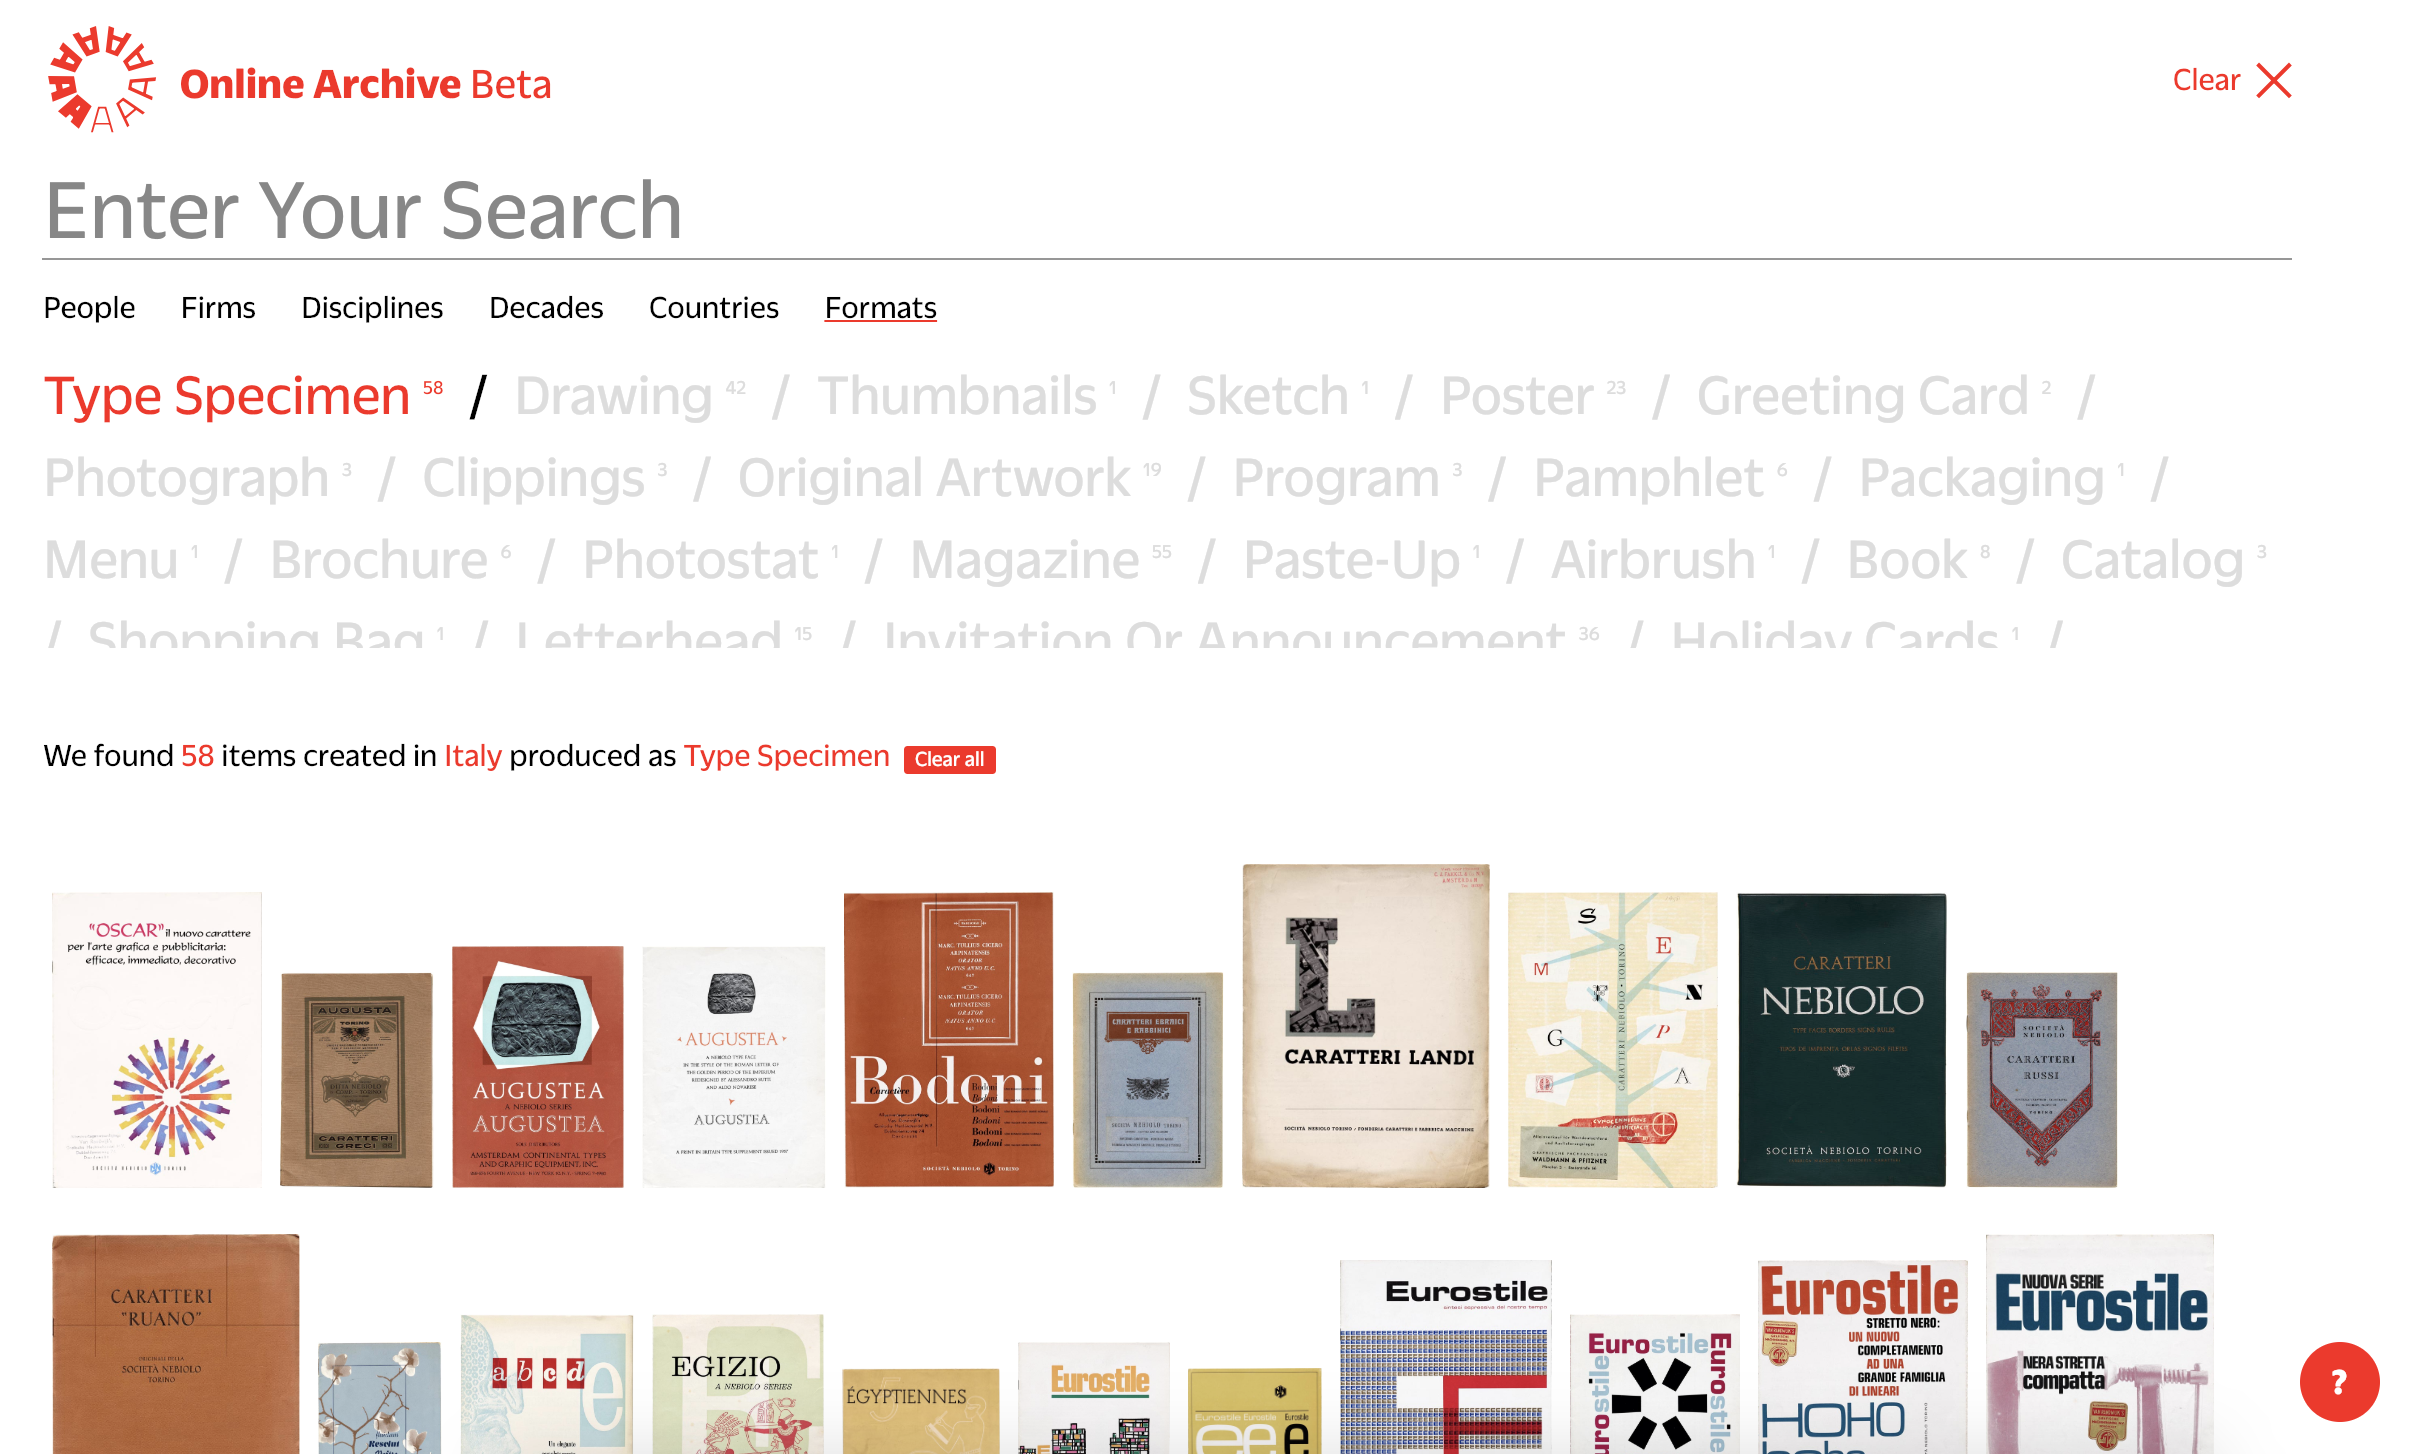 Letterform Archive’s catalog search function